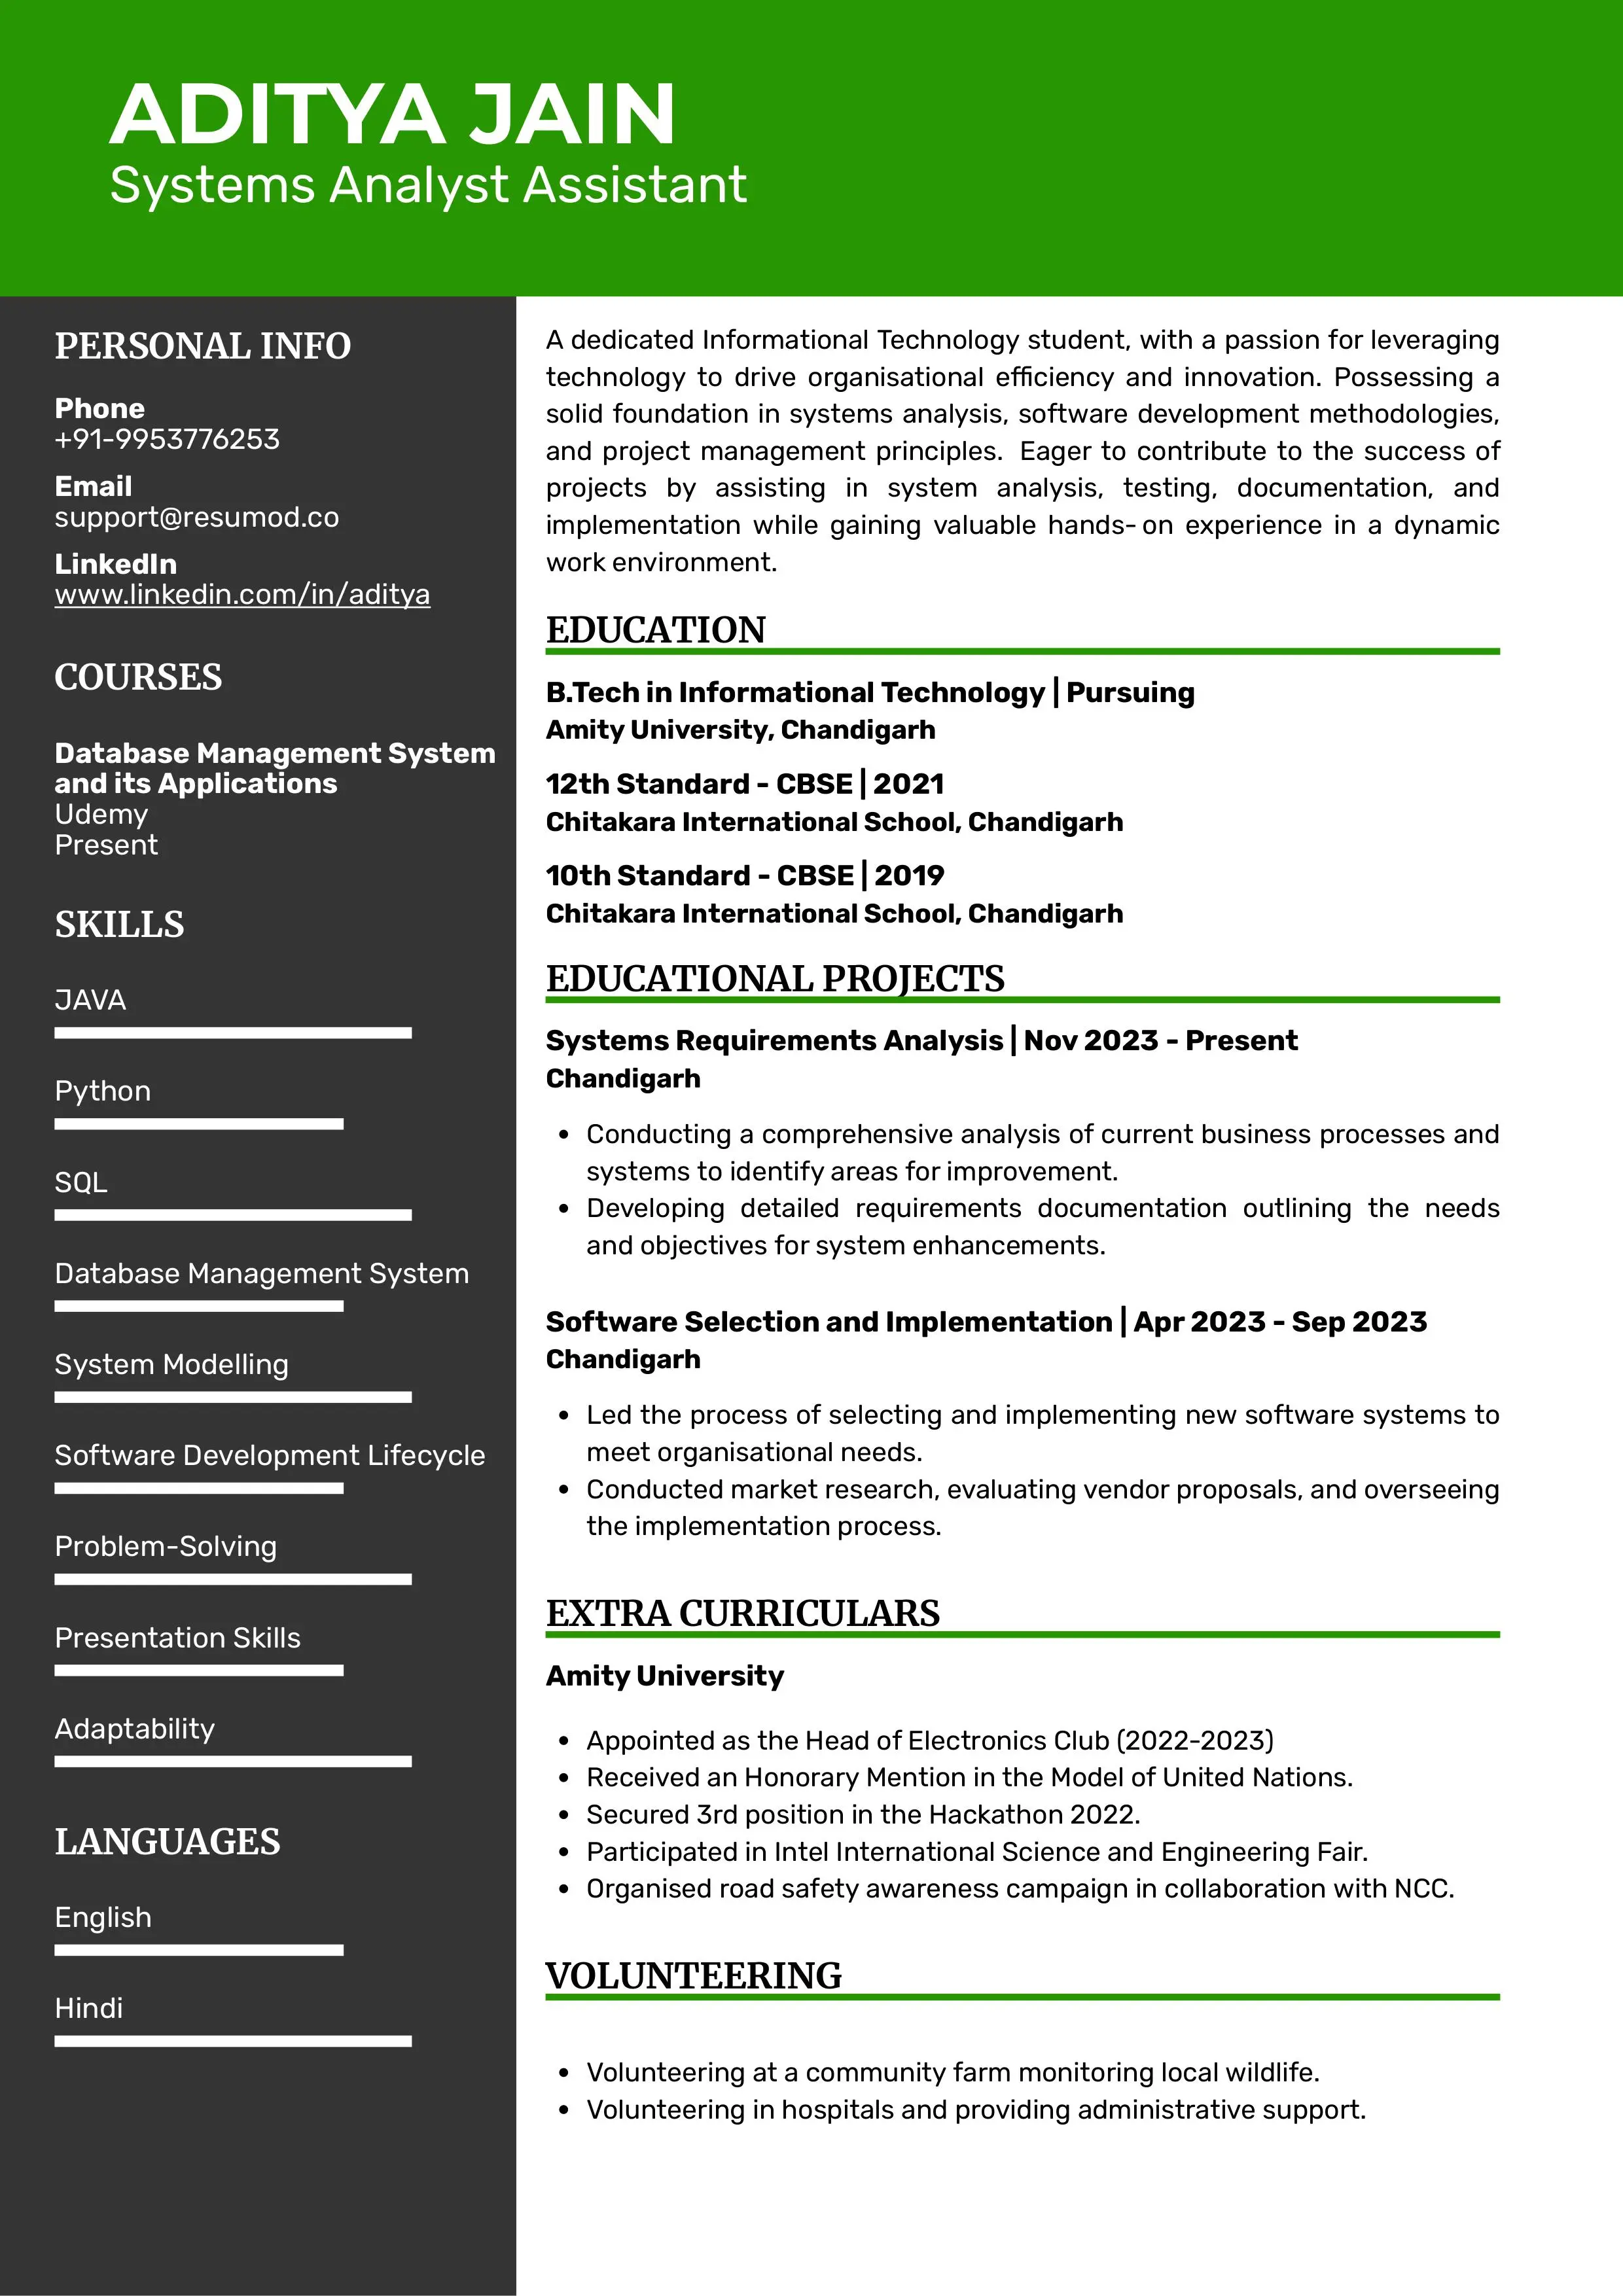 Sample Resume of Systems Analyst Assistant | Free Resume Templates & Samples on Resumod.co